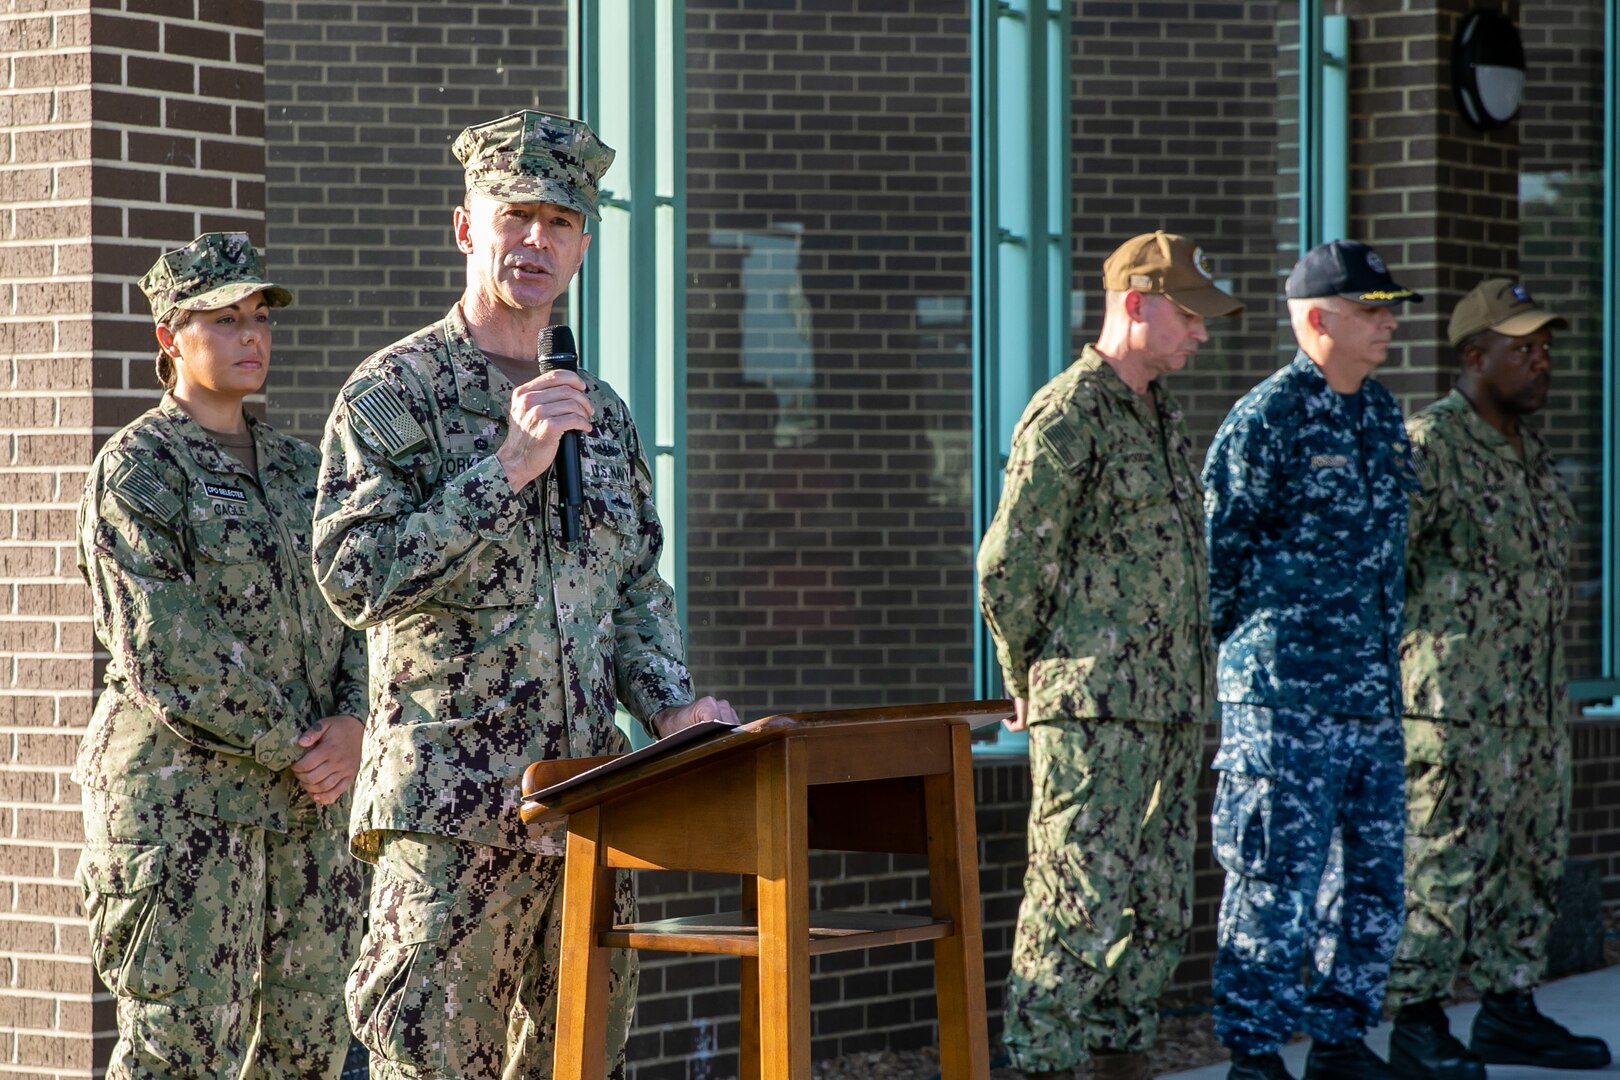 Norfolk Naval Shipyard Commander, Capt. Kai Torkelson, honors the fallen during a Patriots Day Remembrance Ceremony at America's Shipyard Sept. 11.